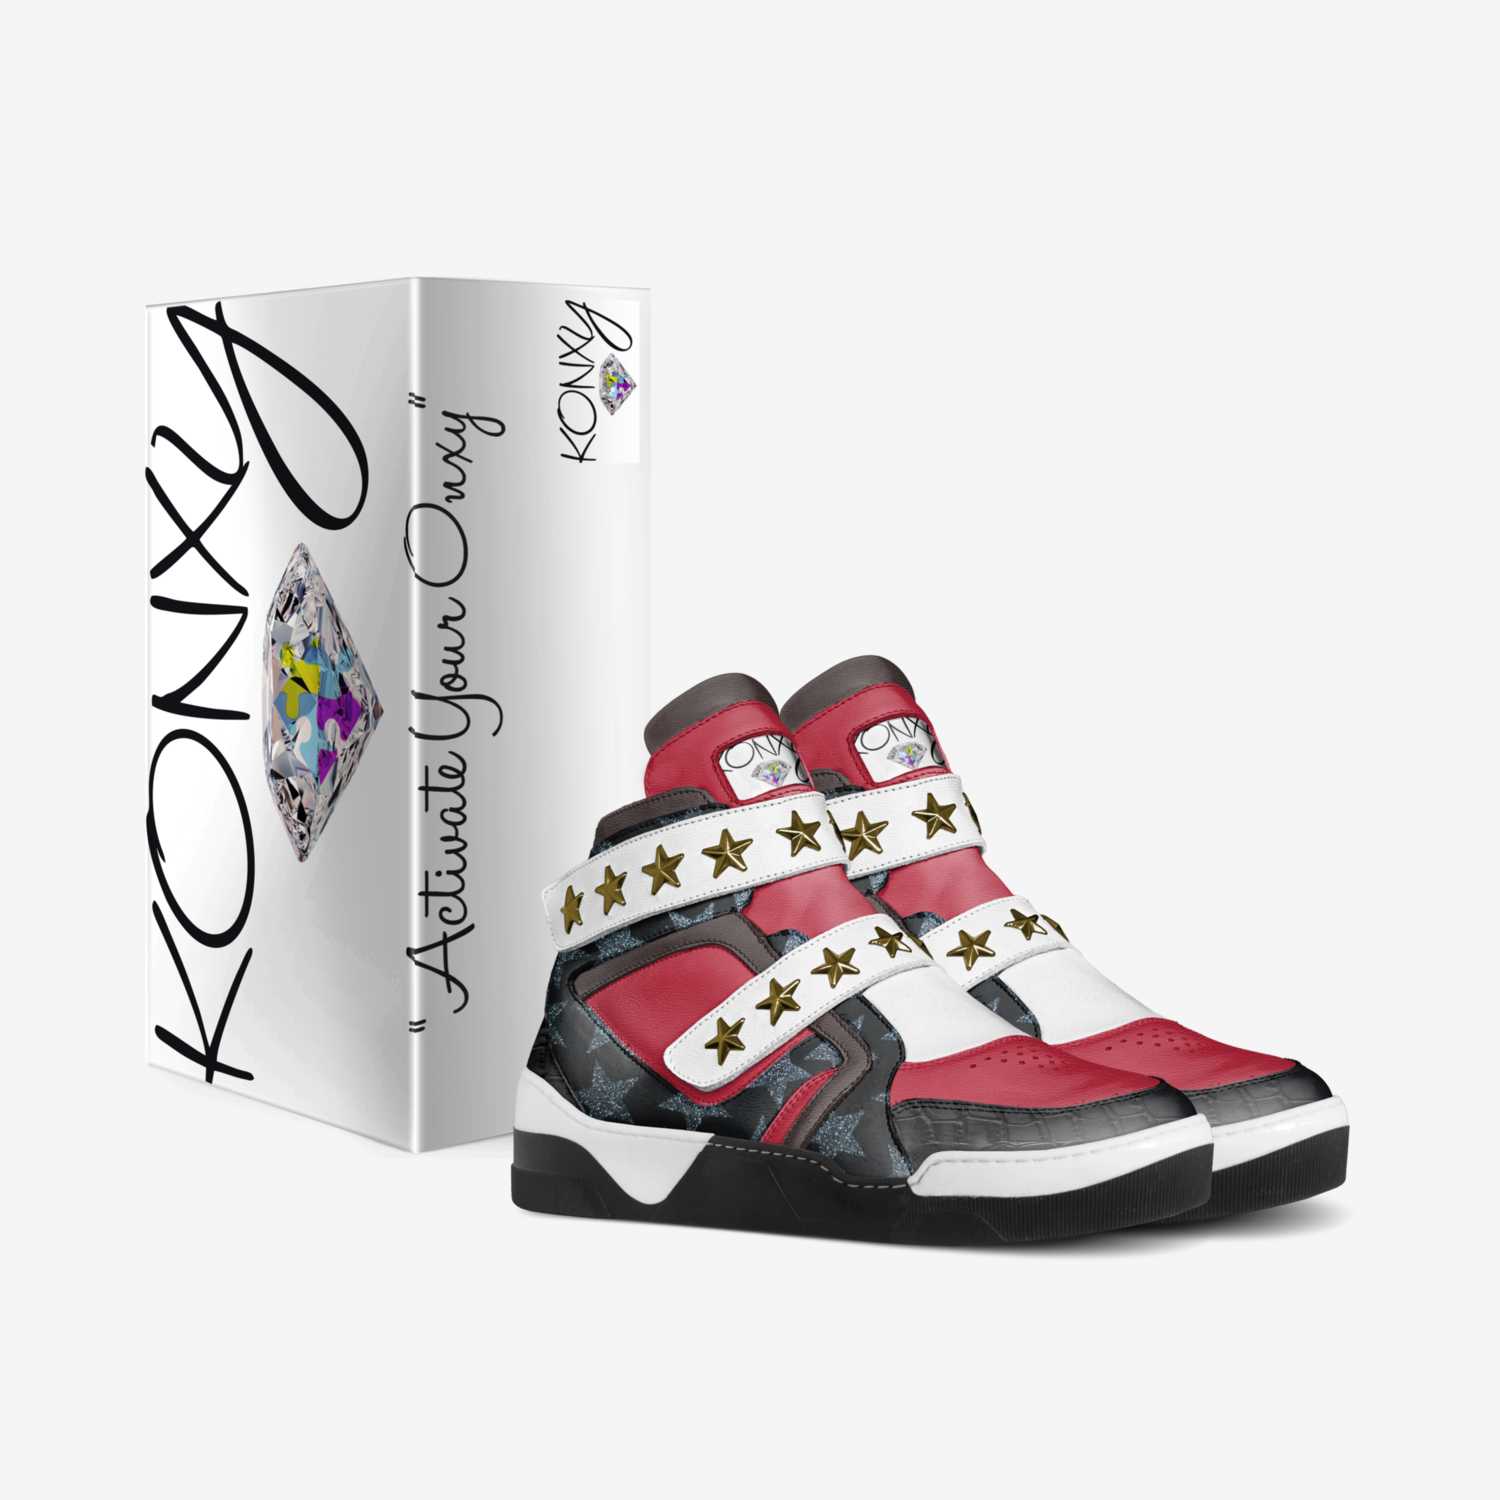 Konxy custom made in Italy shoes by Shakeisha Brown | Box view